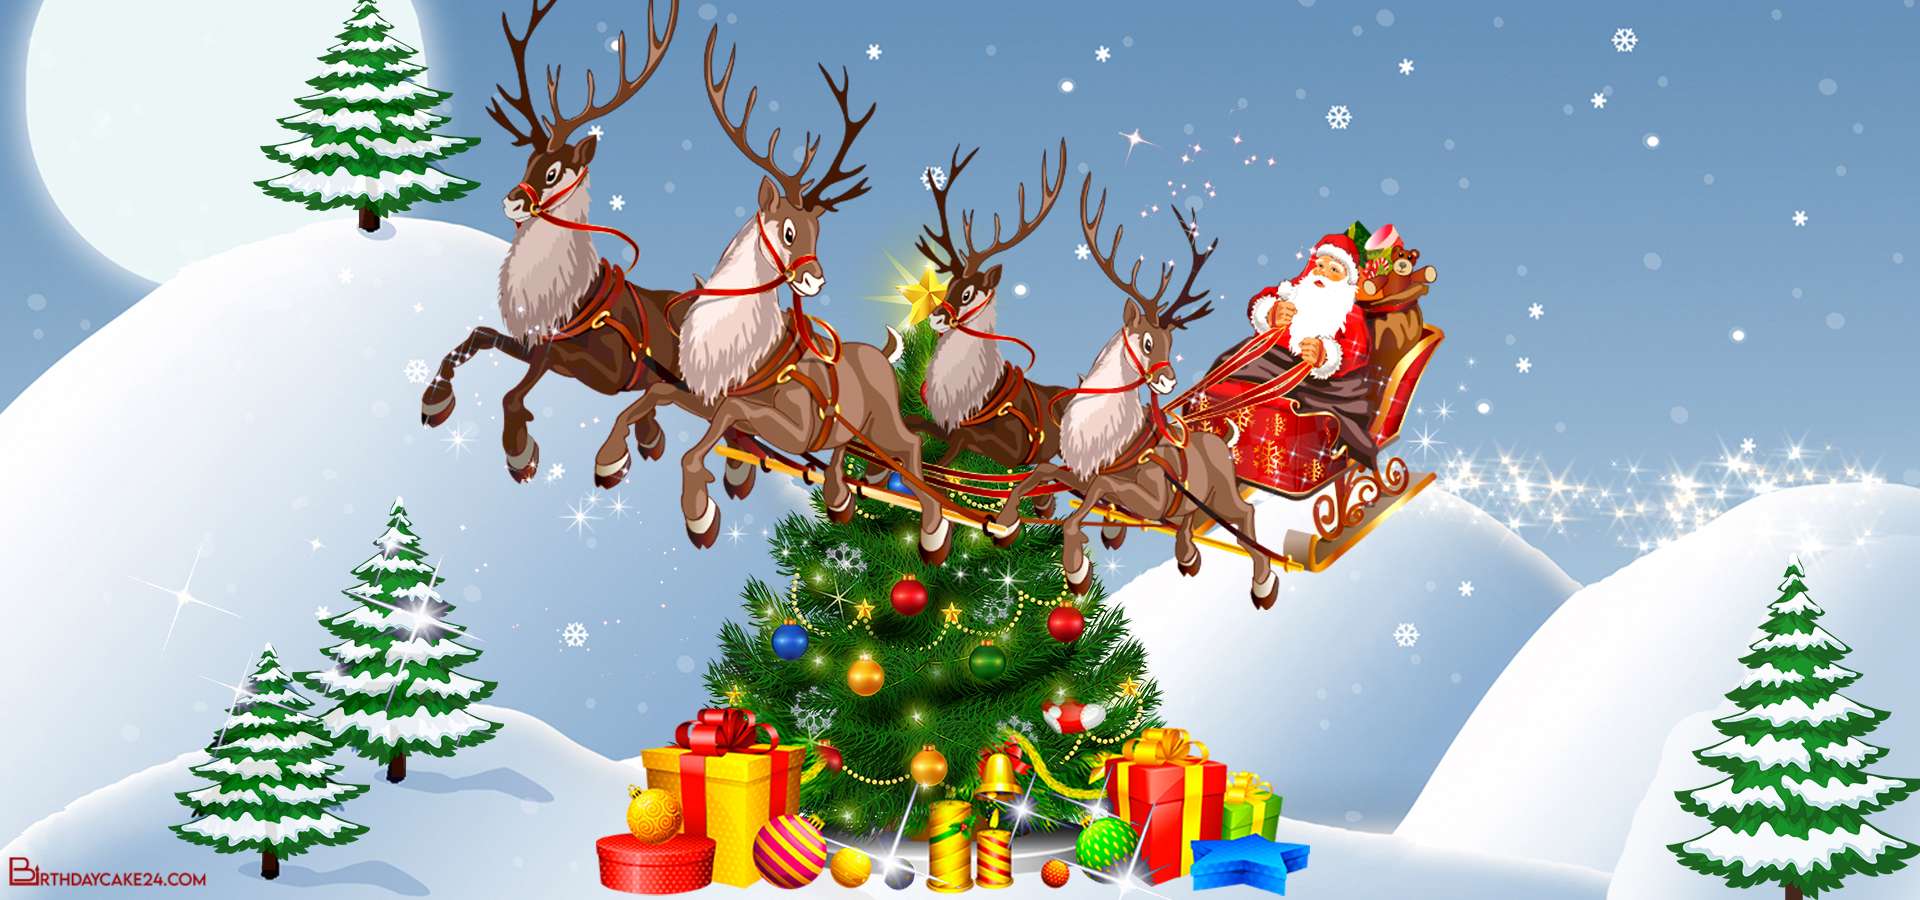 Background Merry Christmas Wallpaper Download 2021 Full HD